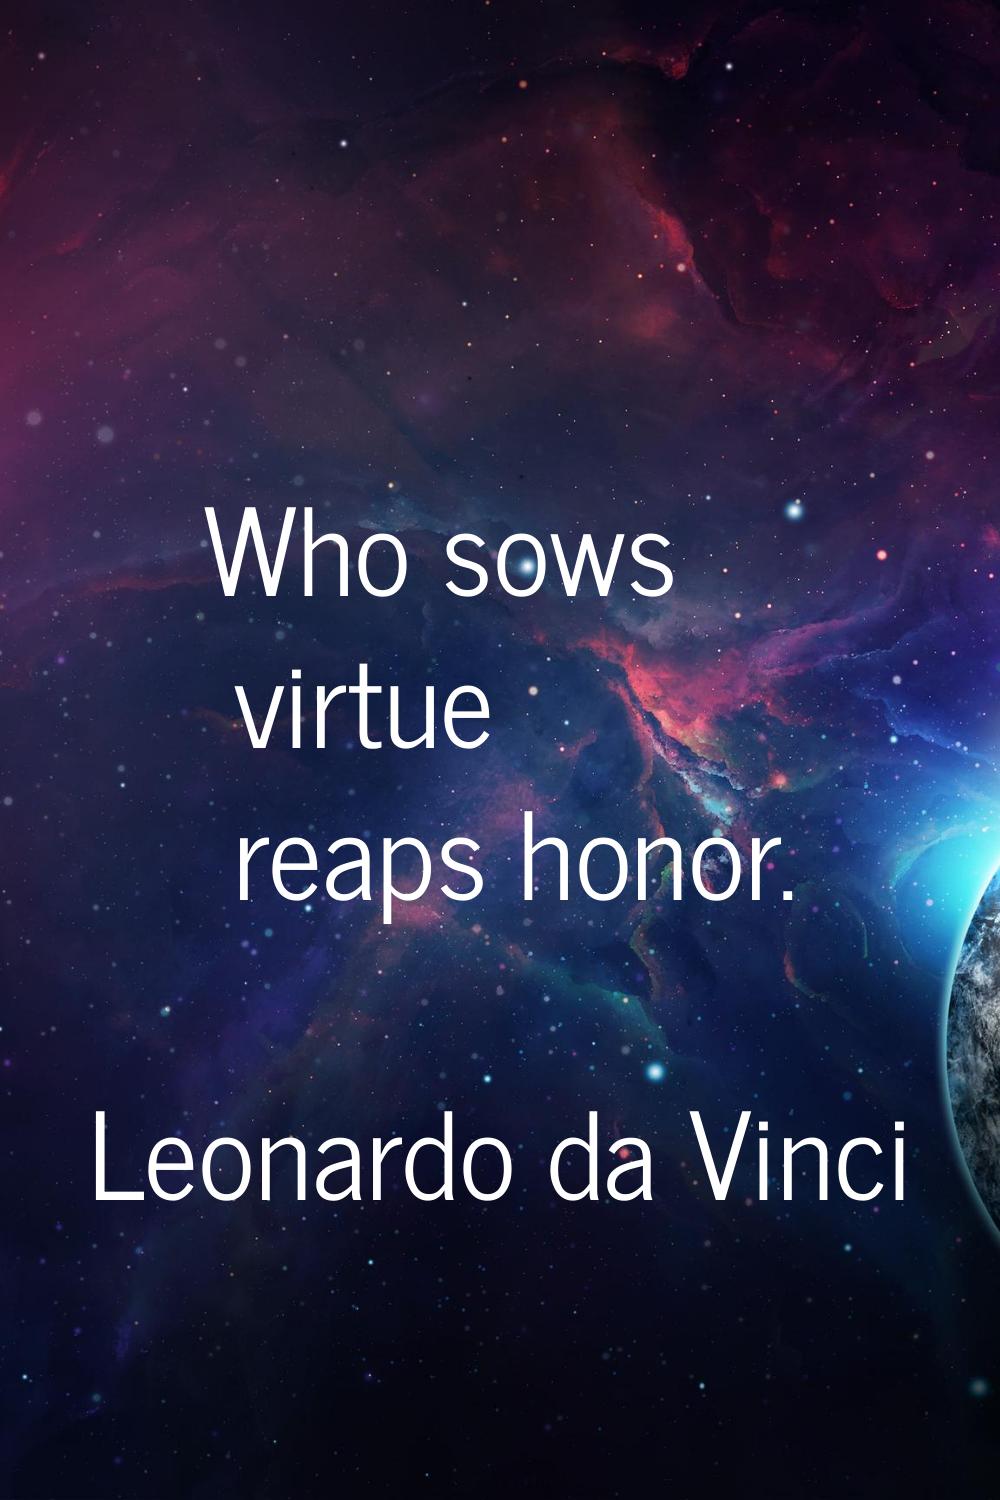 Who sows virtue reaps honor.